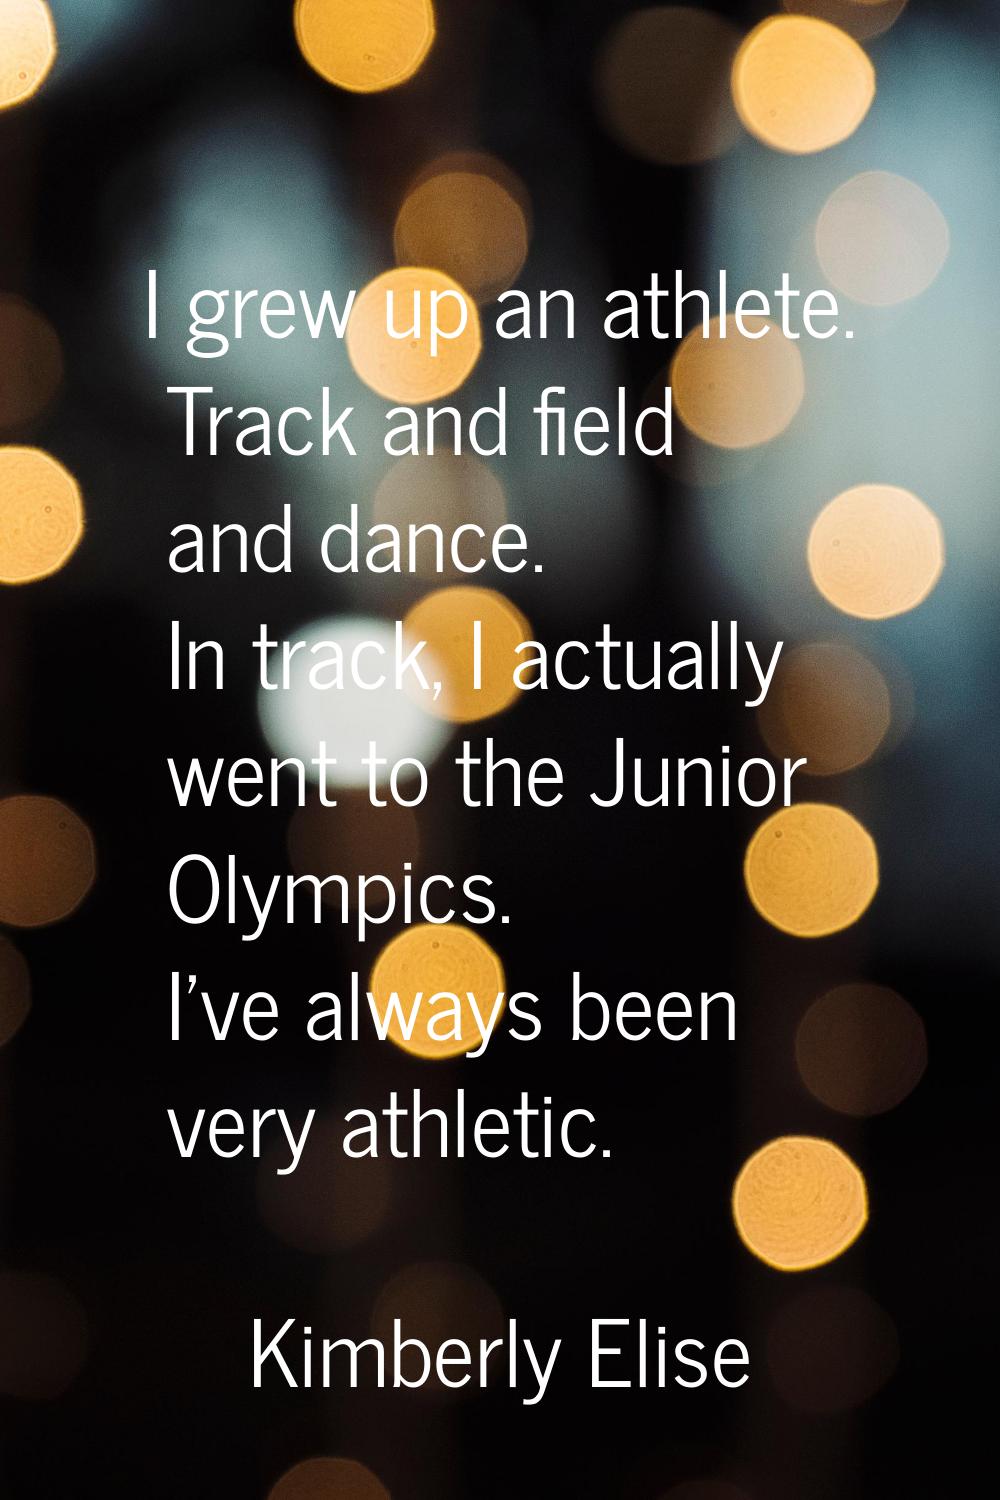 I grew up an athlete. Track and field and dance. In track, I actually went to the Junior Olympics. 